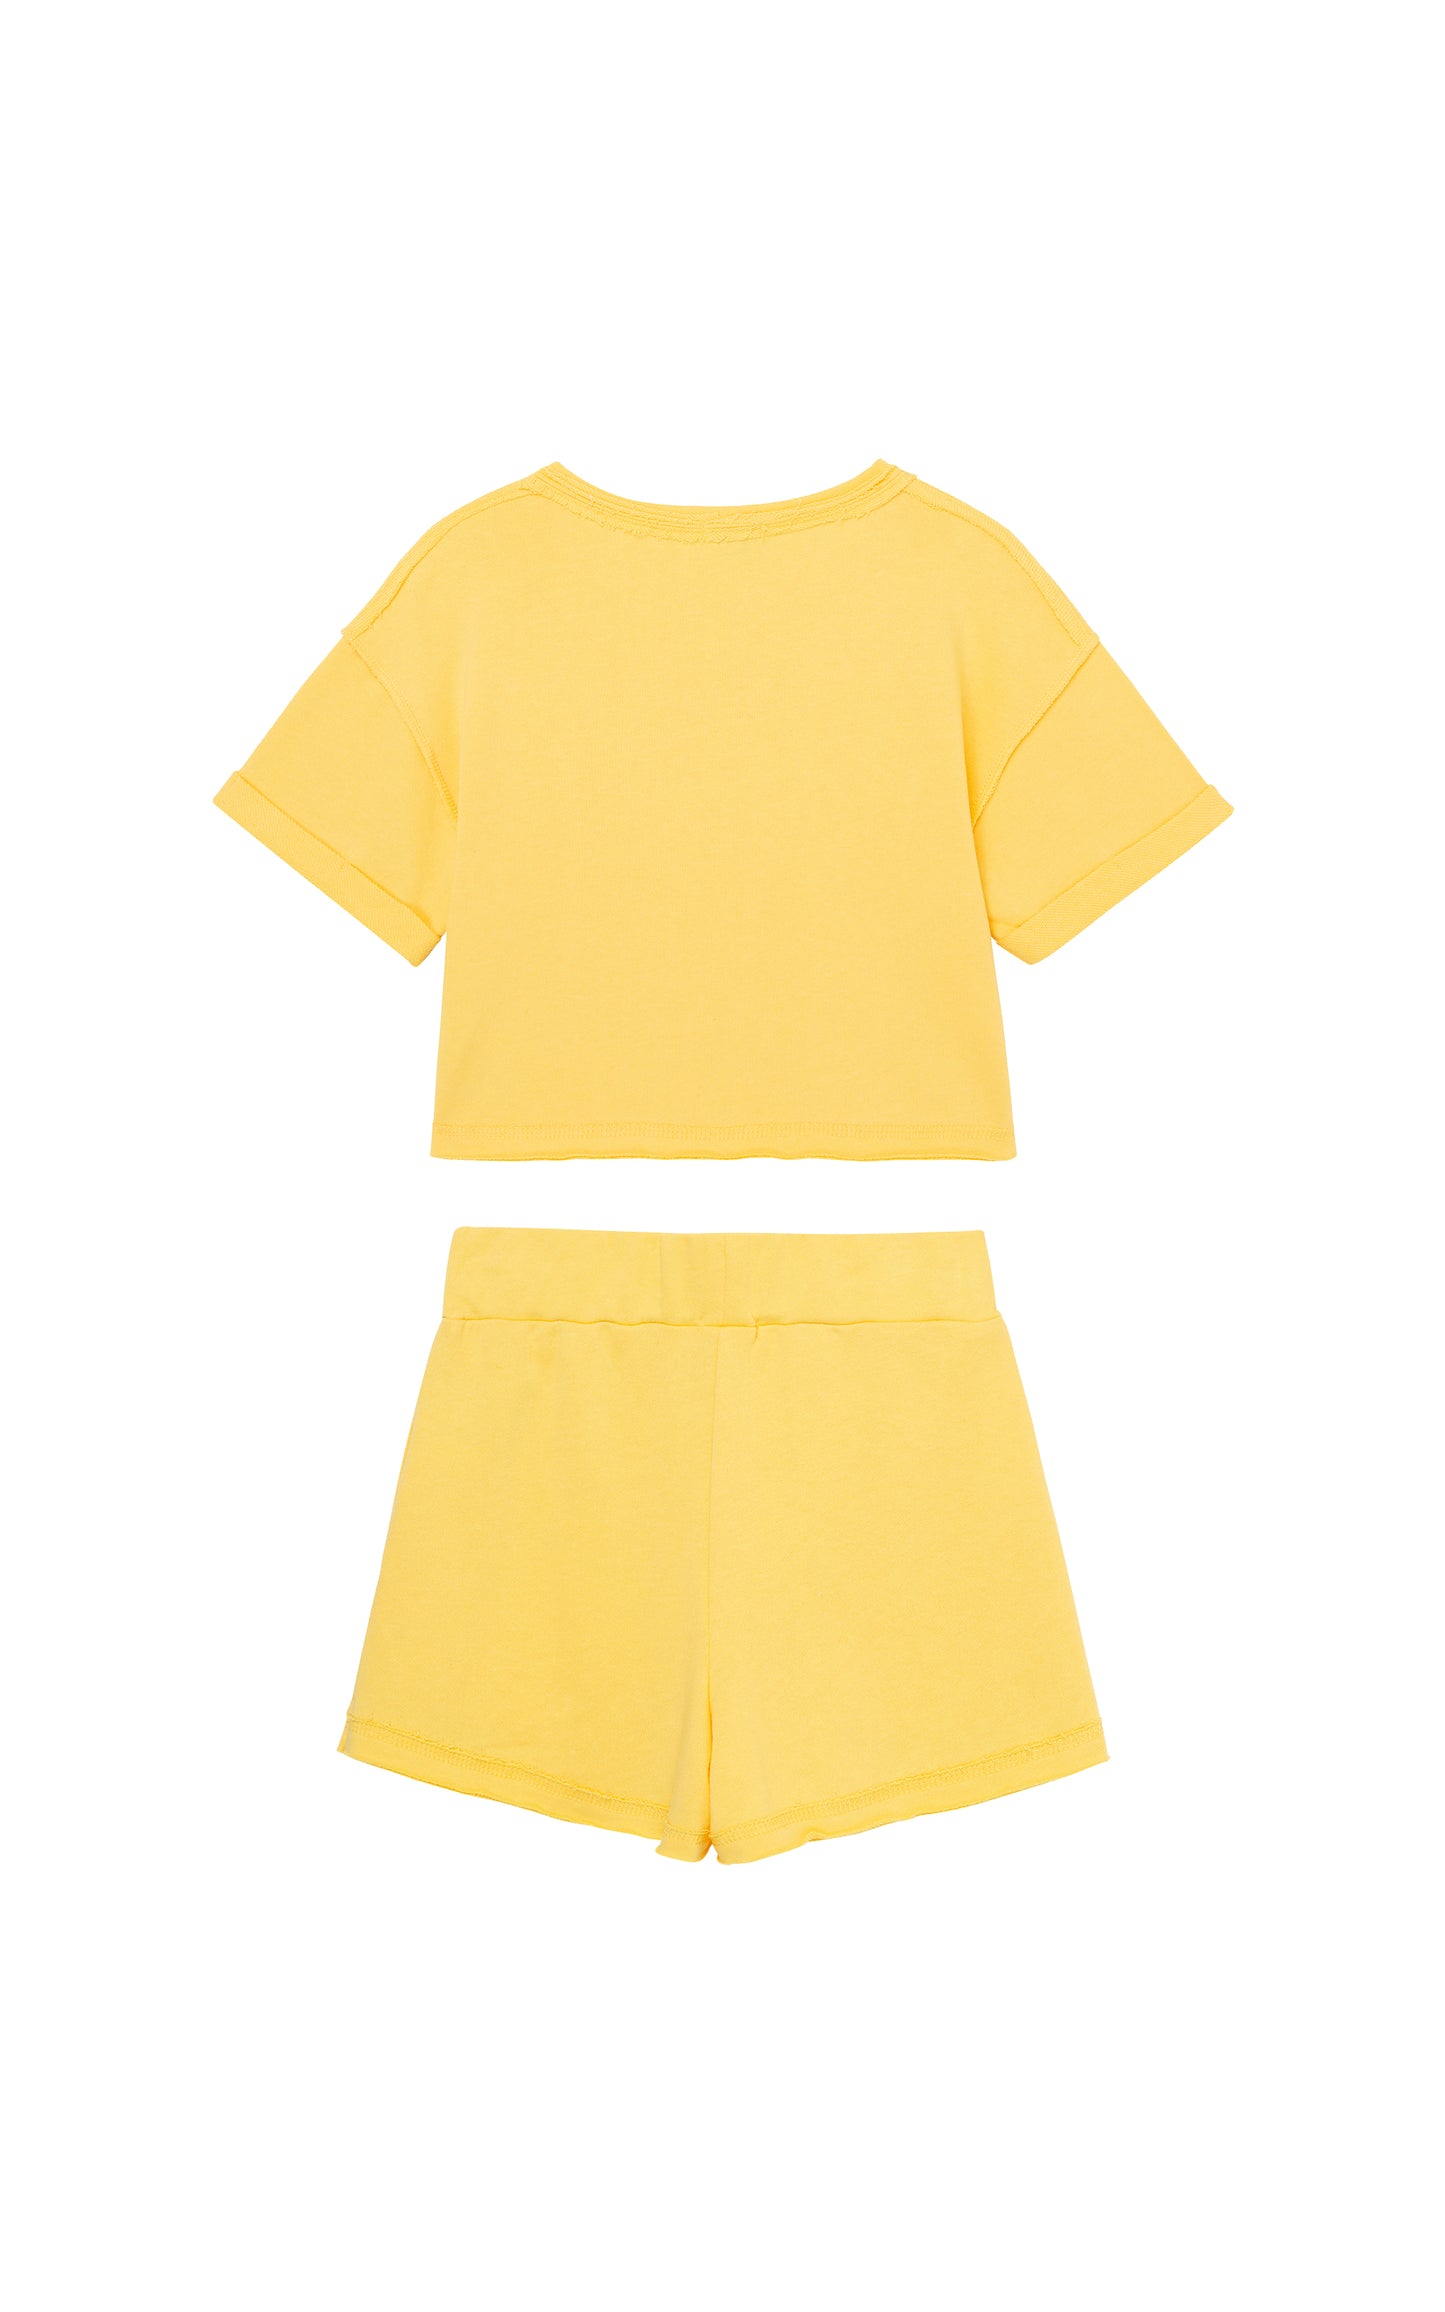 Back of yellow French terry cloth shirt and short set